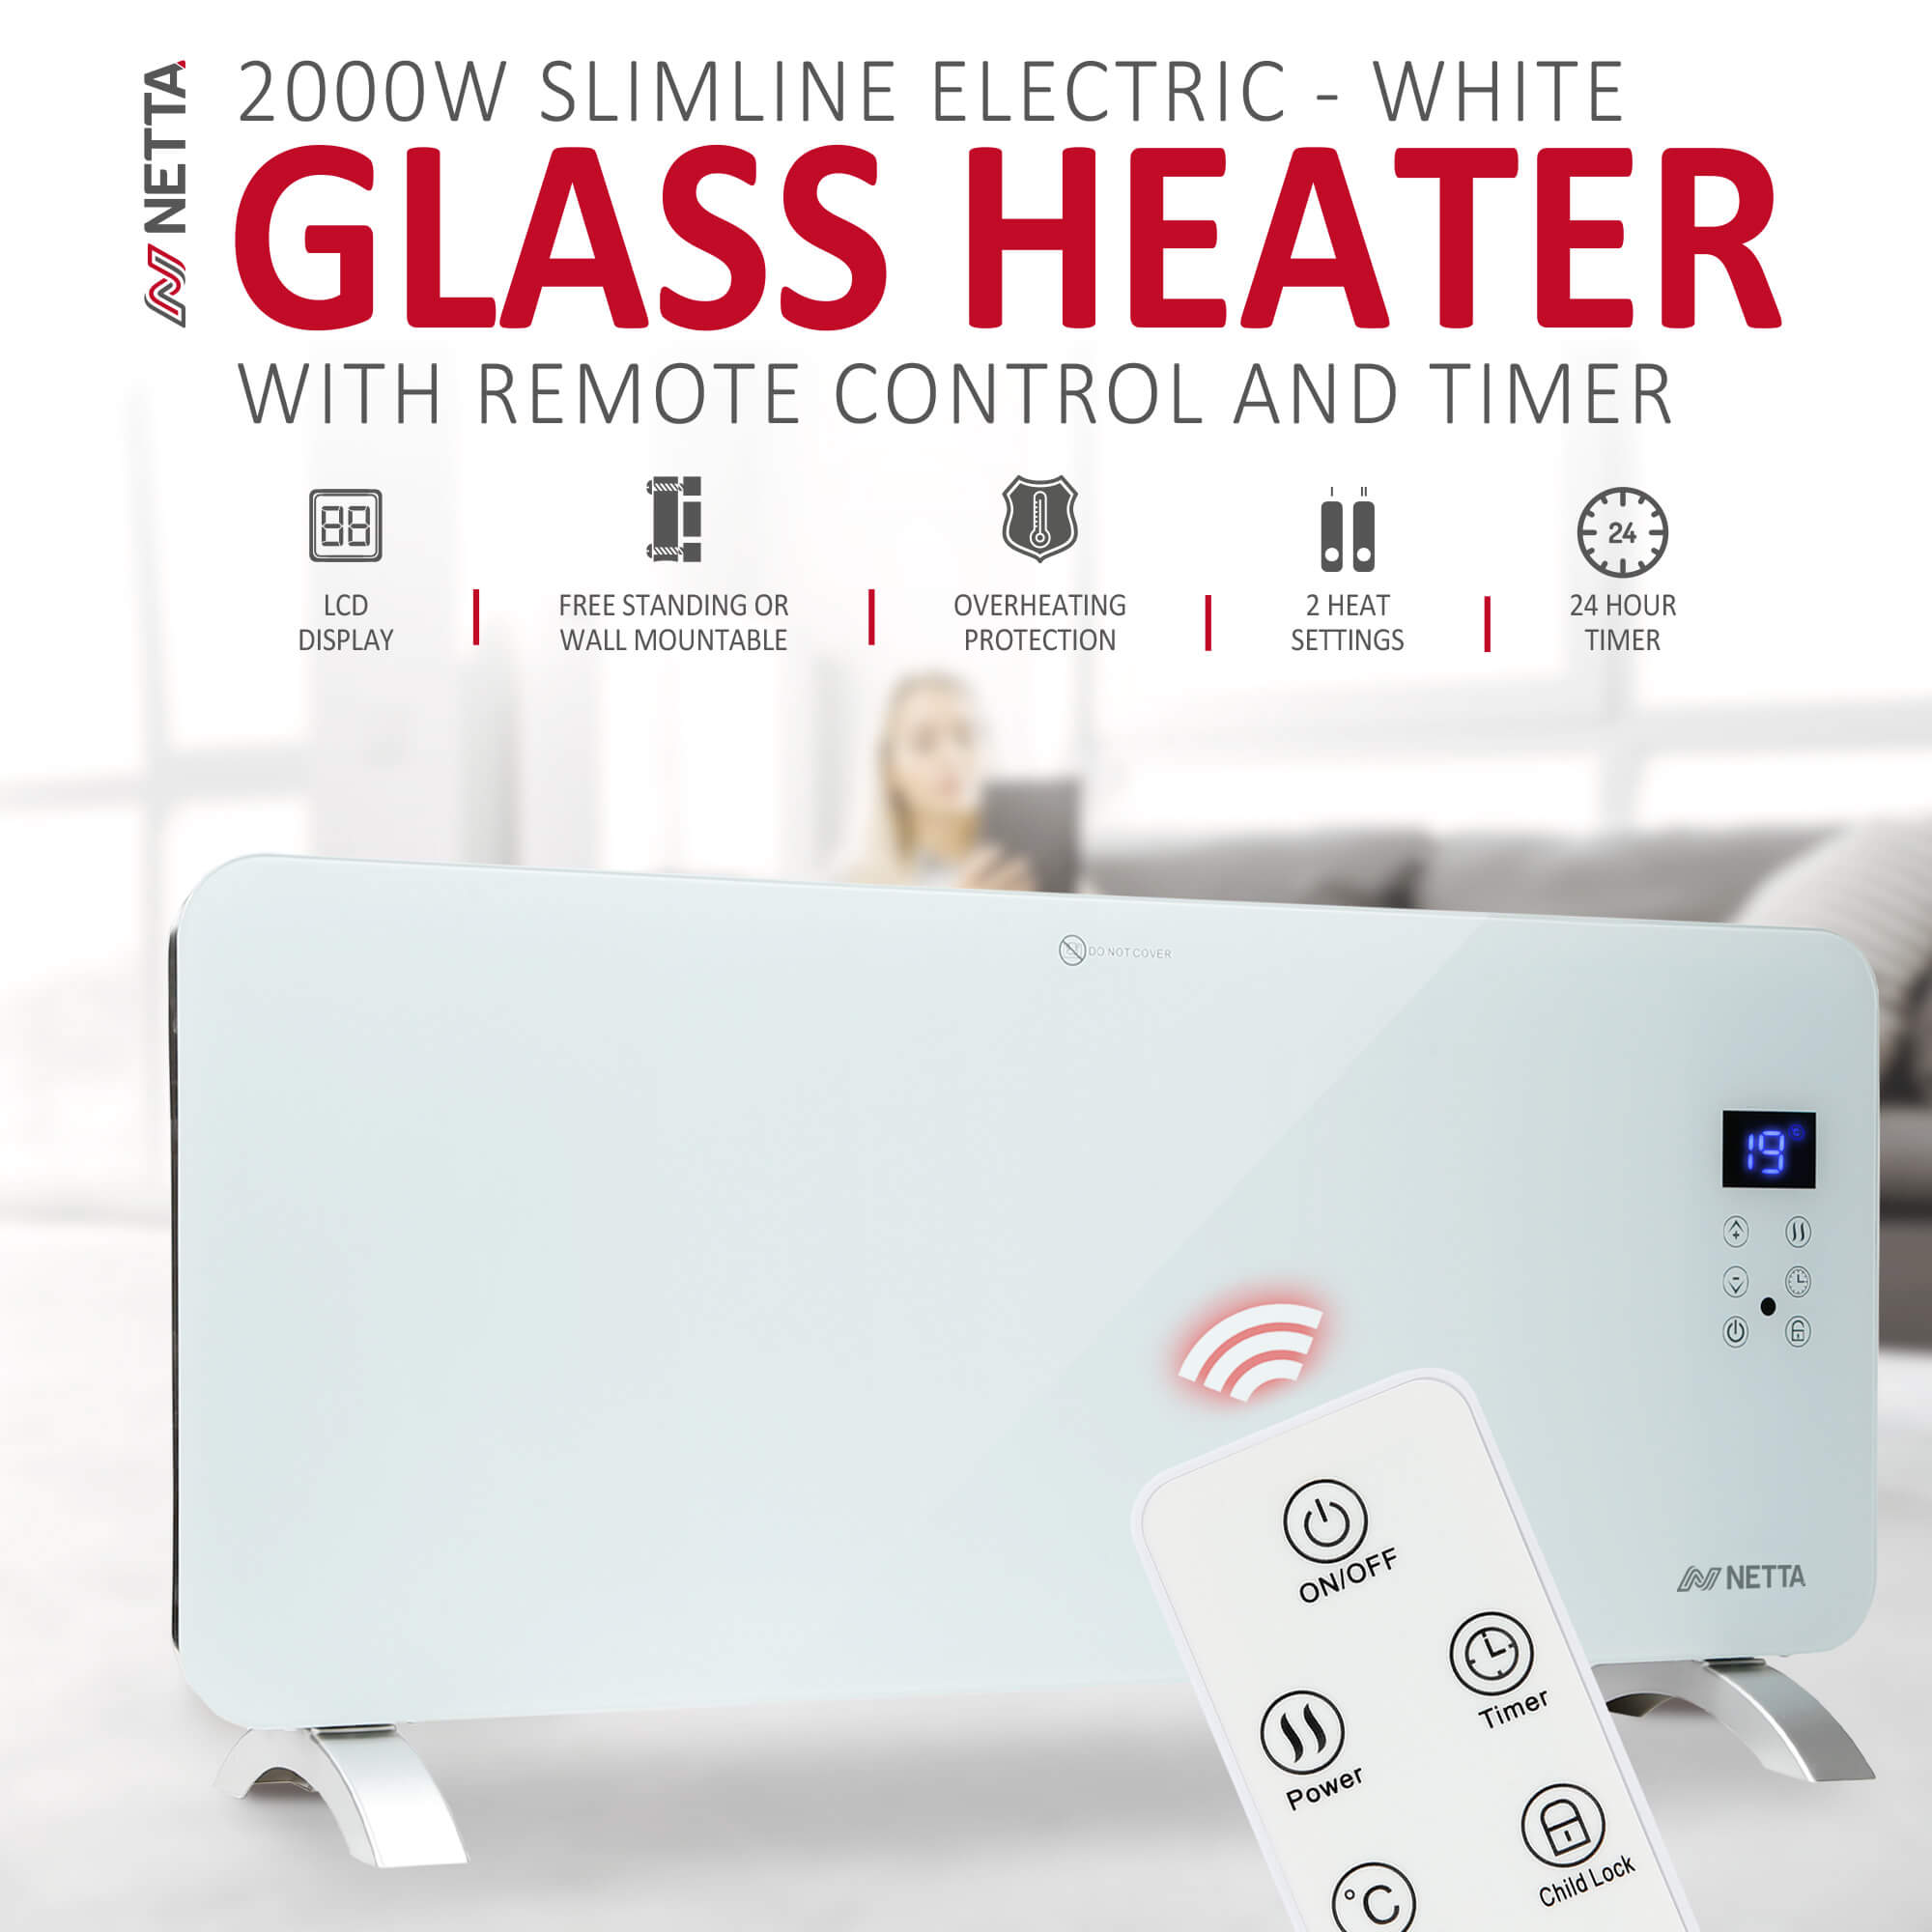 2000W Glass Panel Heater with 24 Hour Timer - White